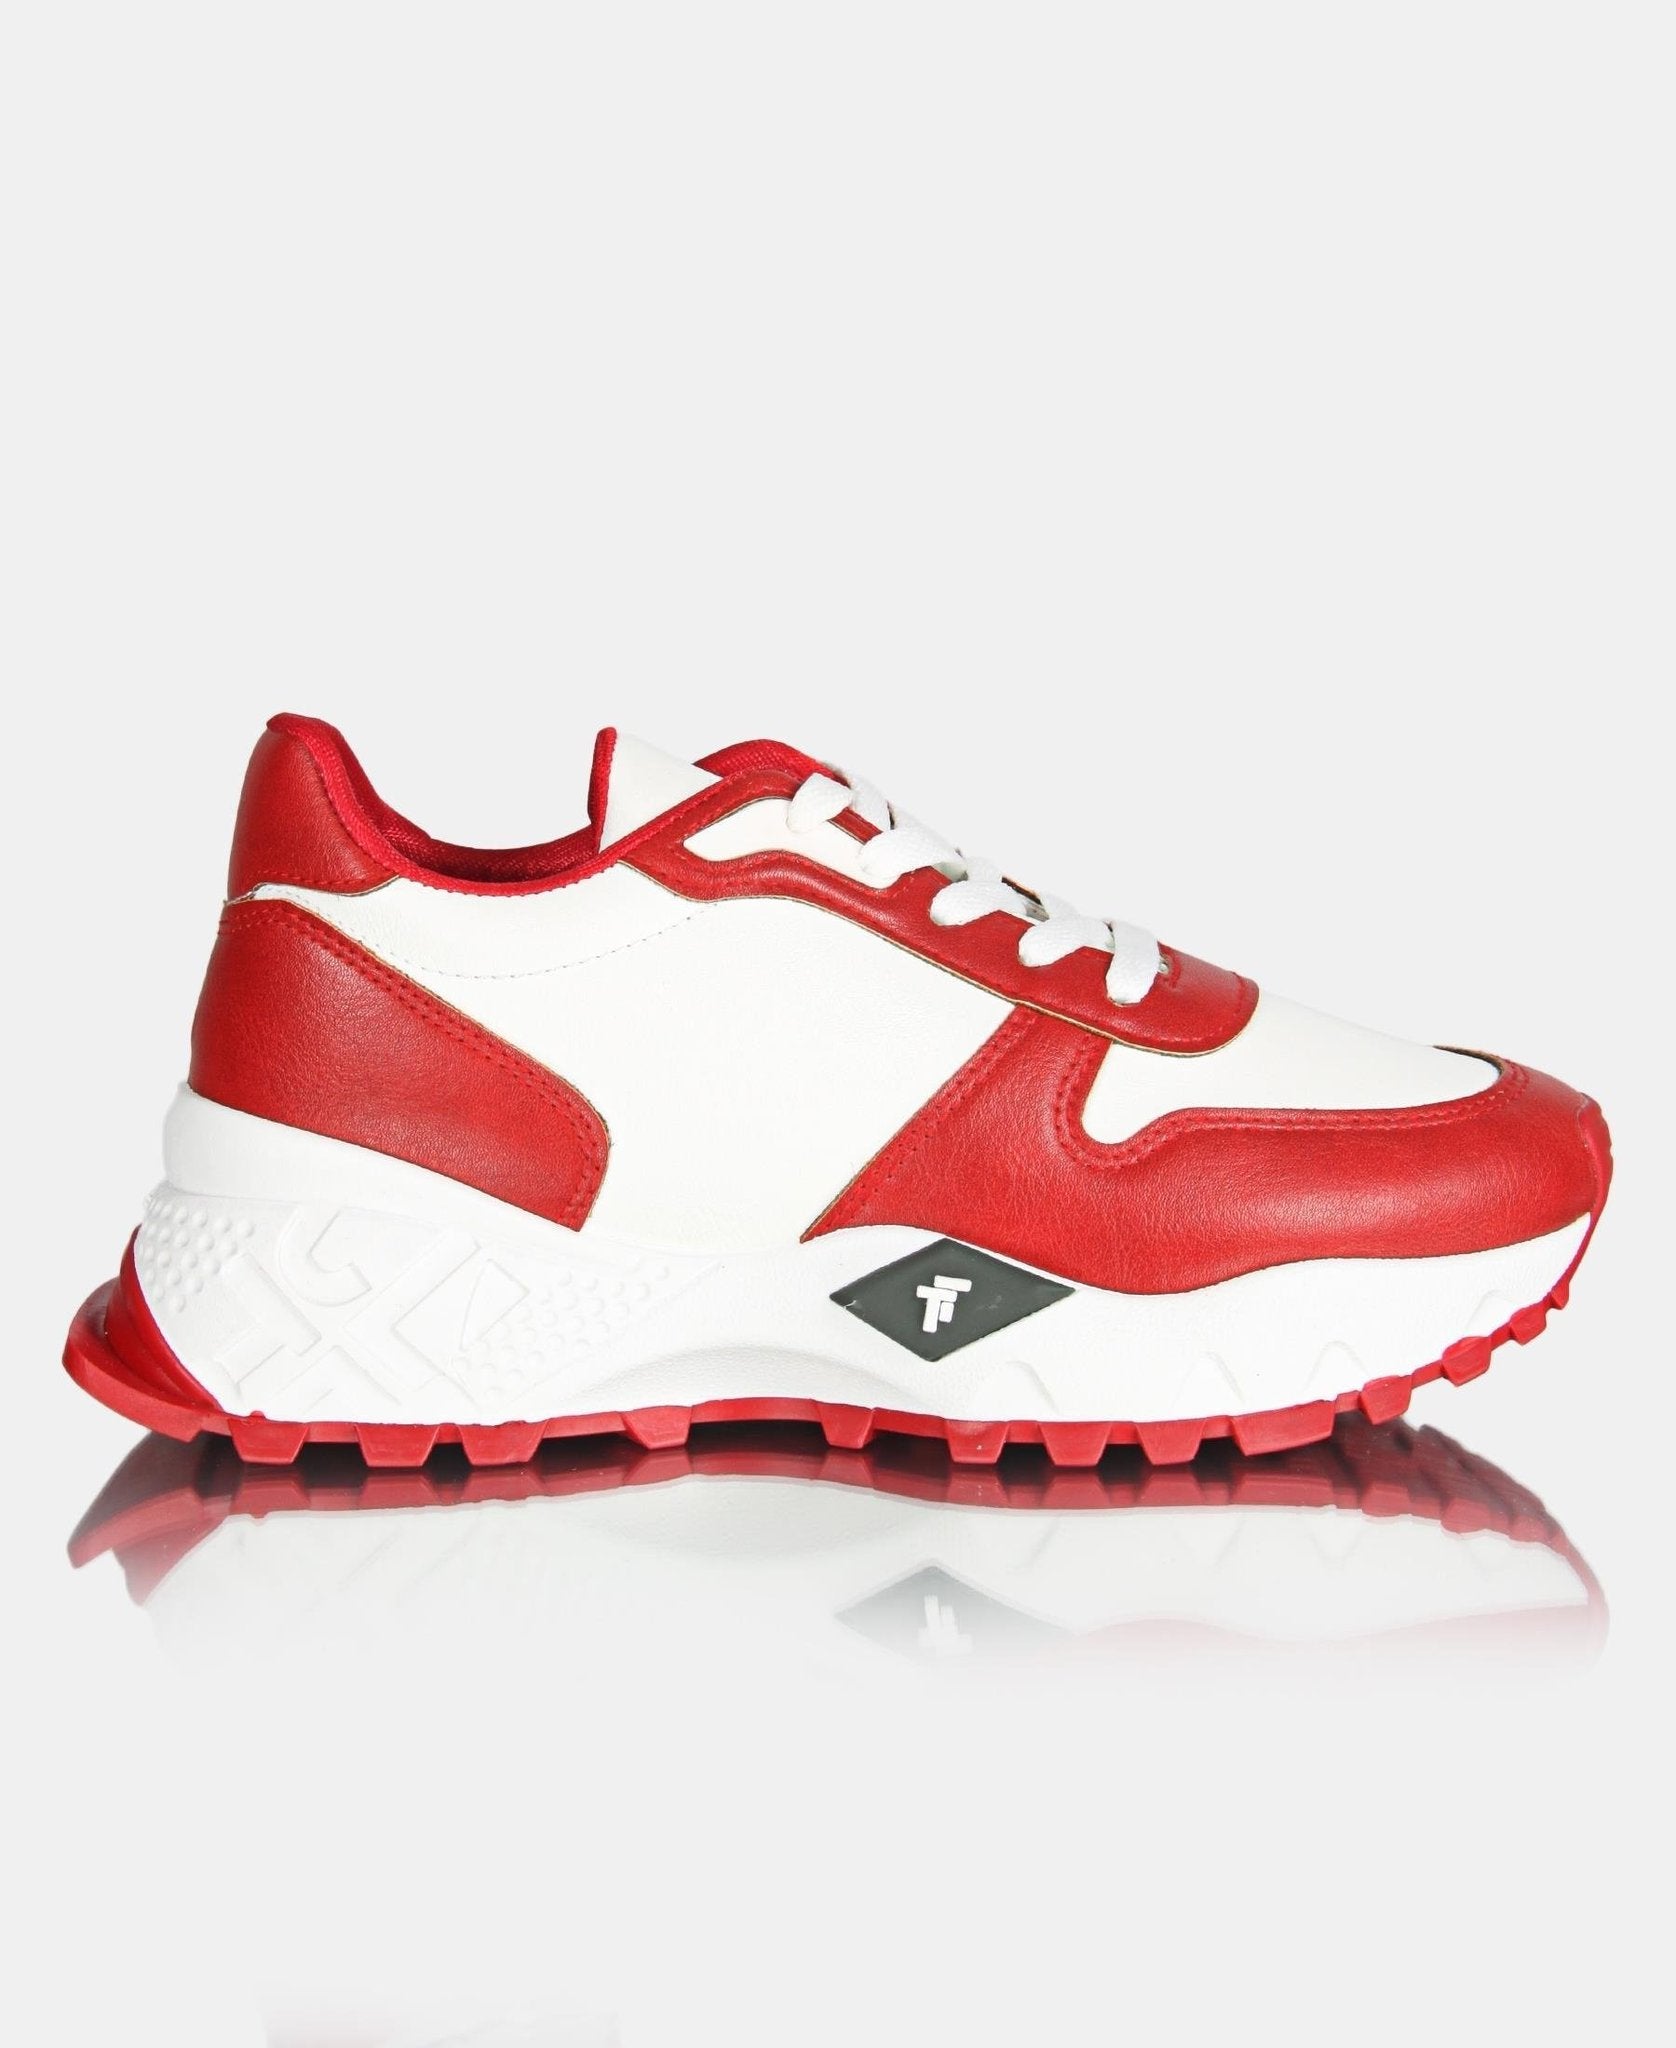 LADIES' CASUAL SNEAKERS - RED-WHITE